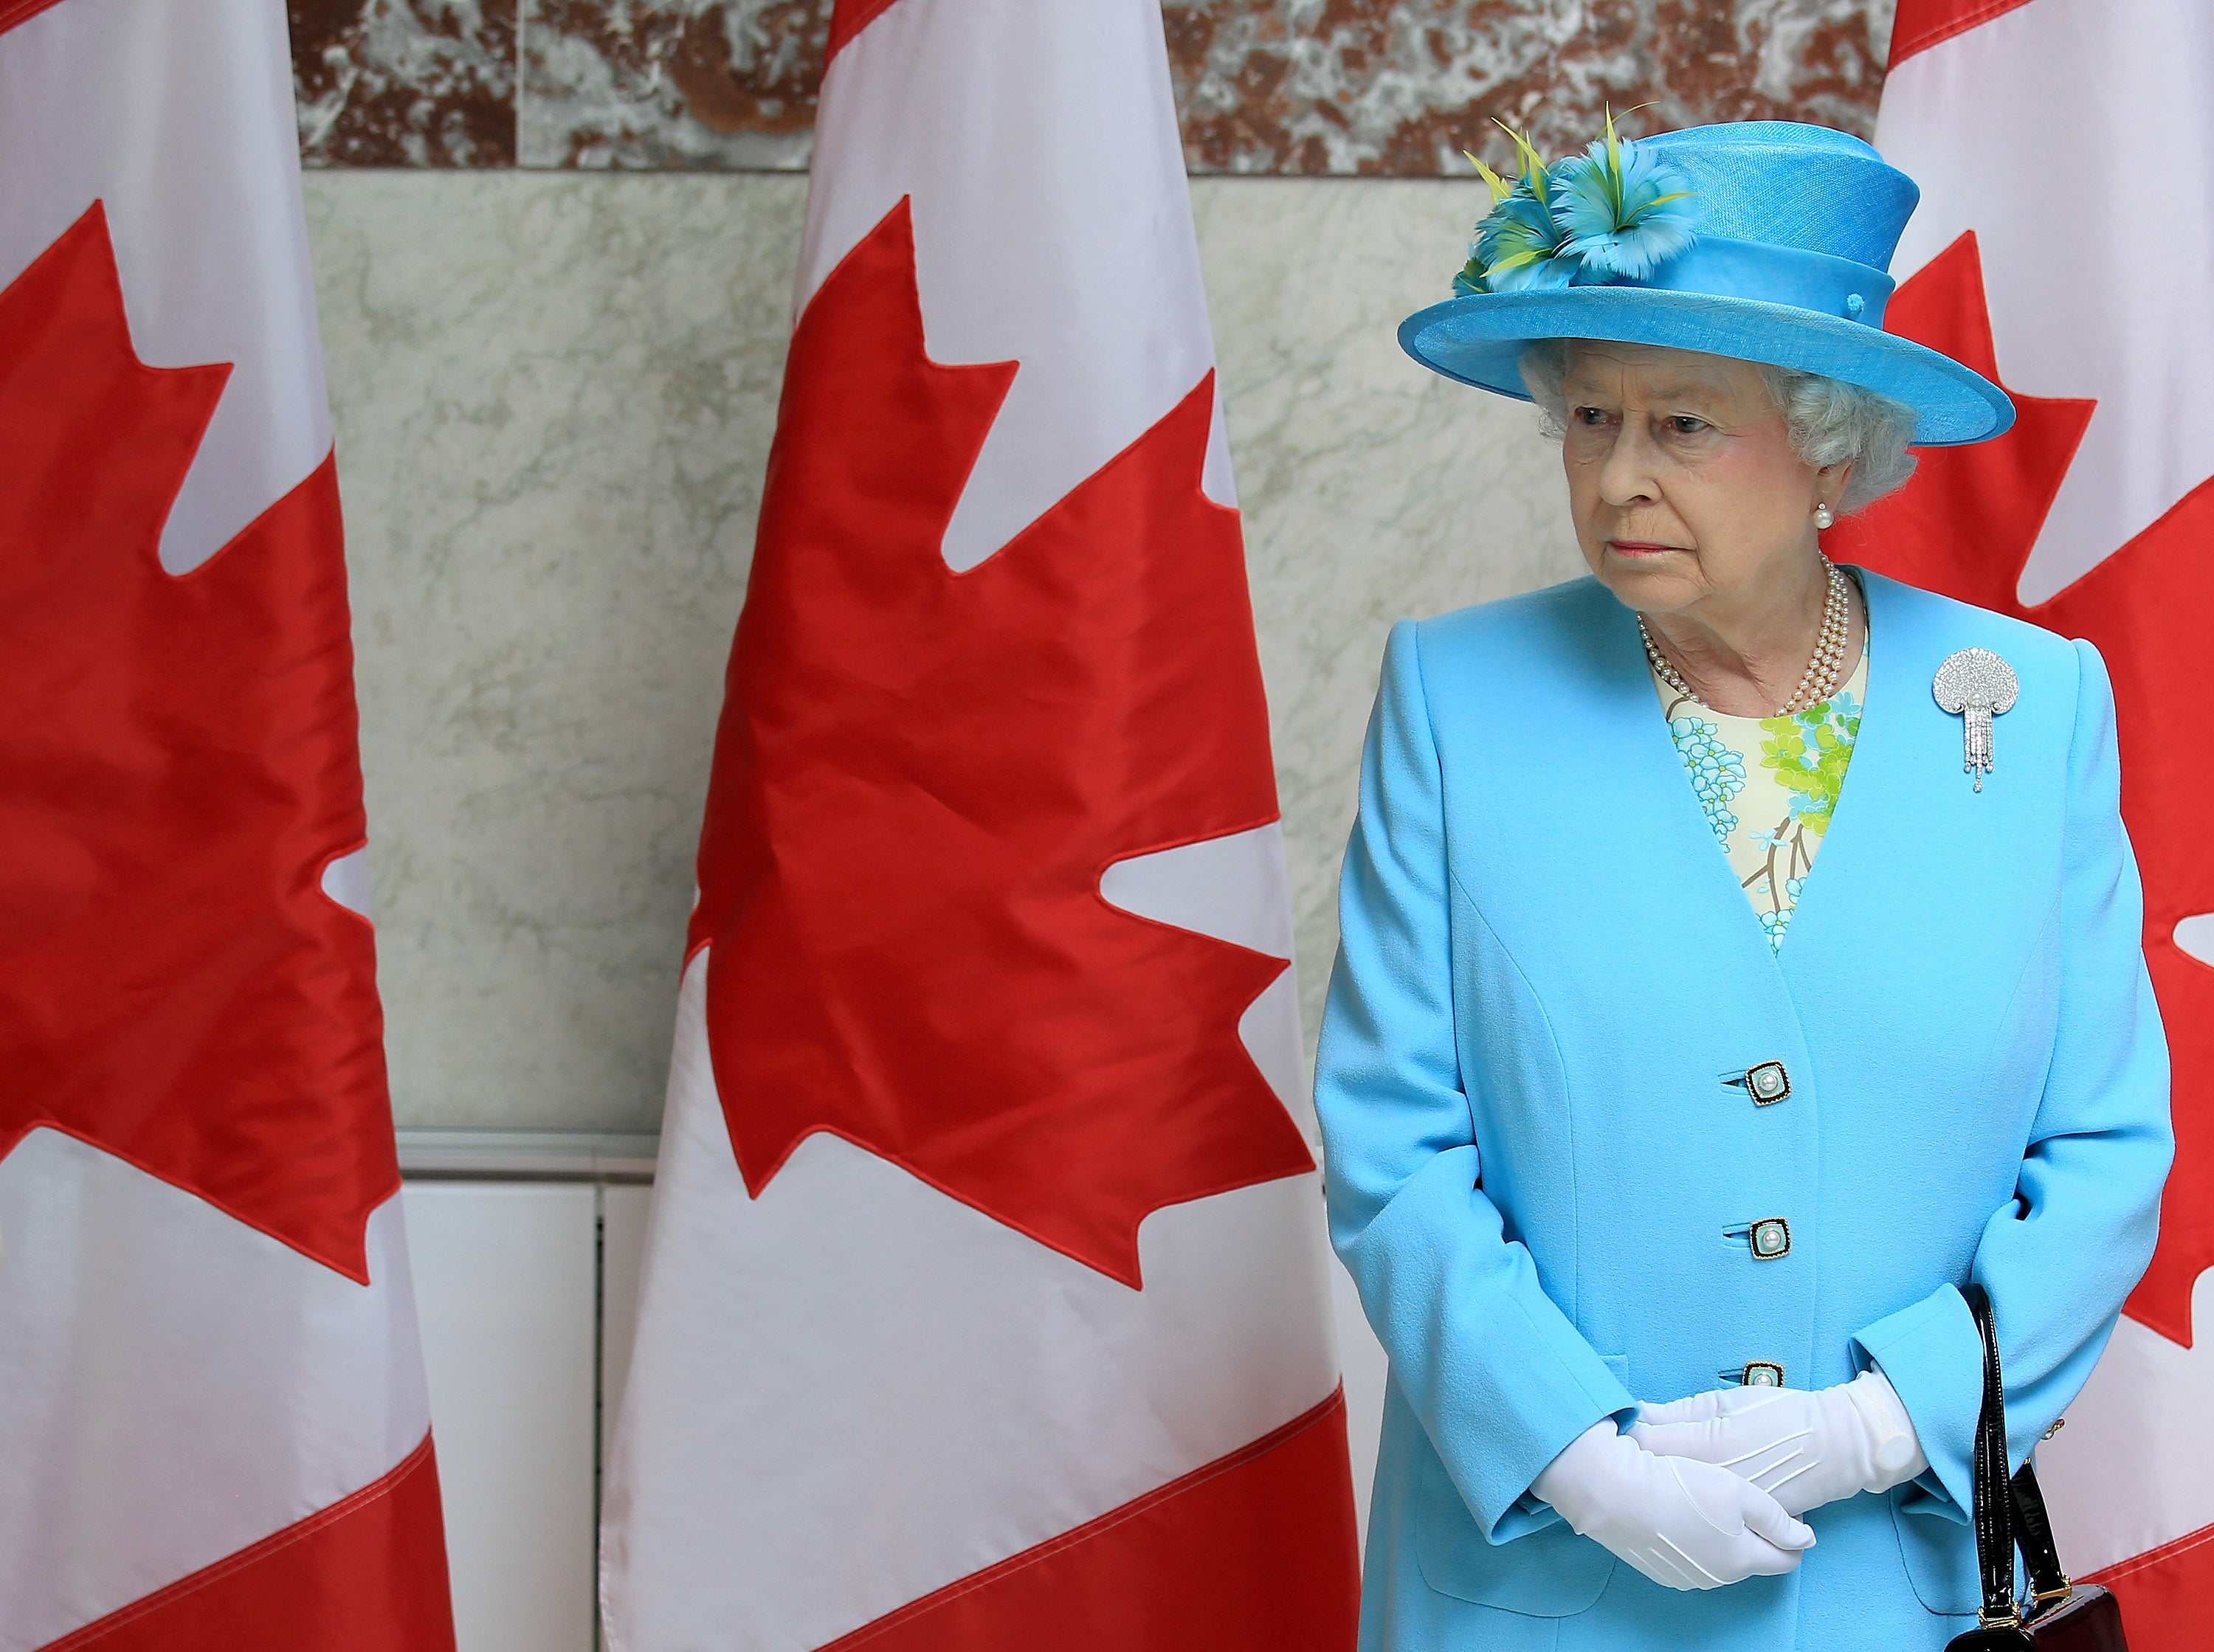 The Queen visiting the Canadian Museum of Nature in Ottawa in 2010